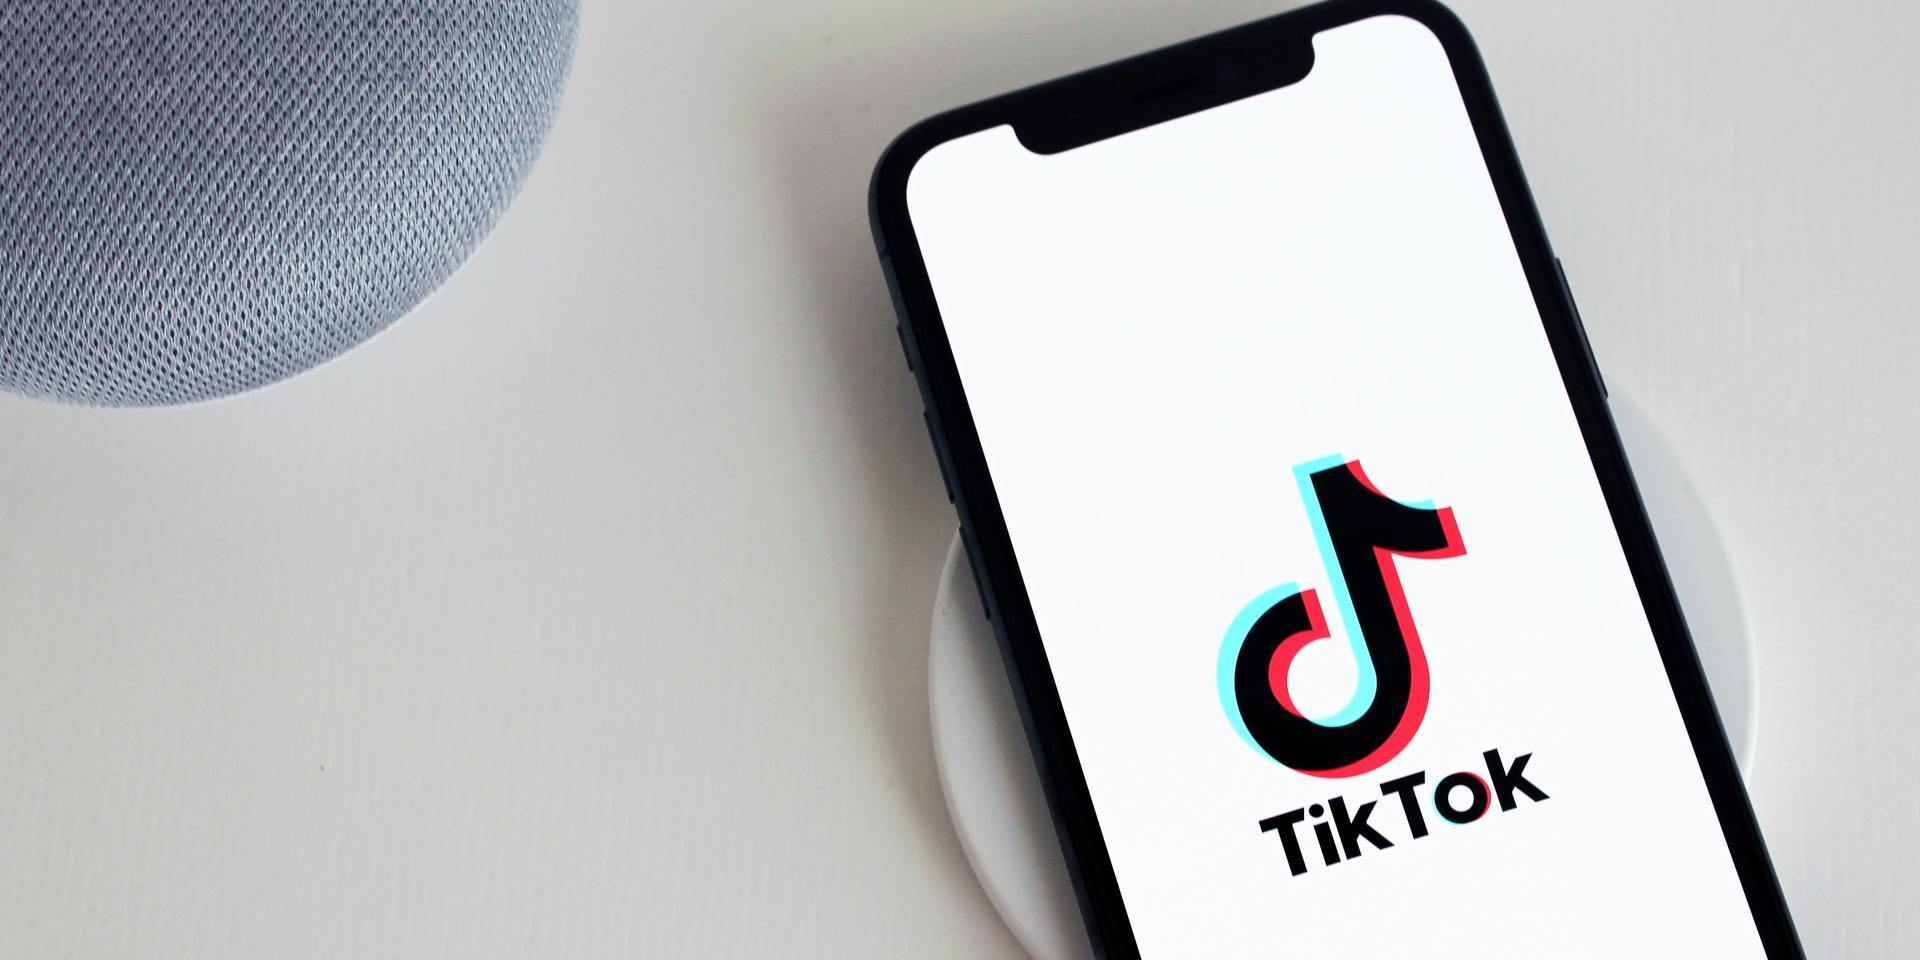 A mobile phone showing TikTok